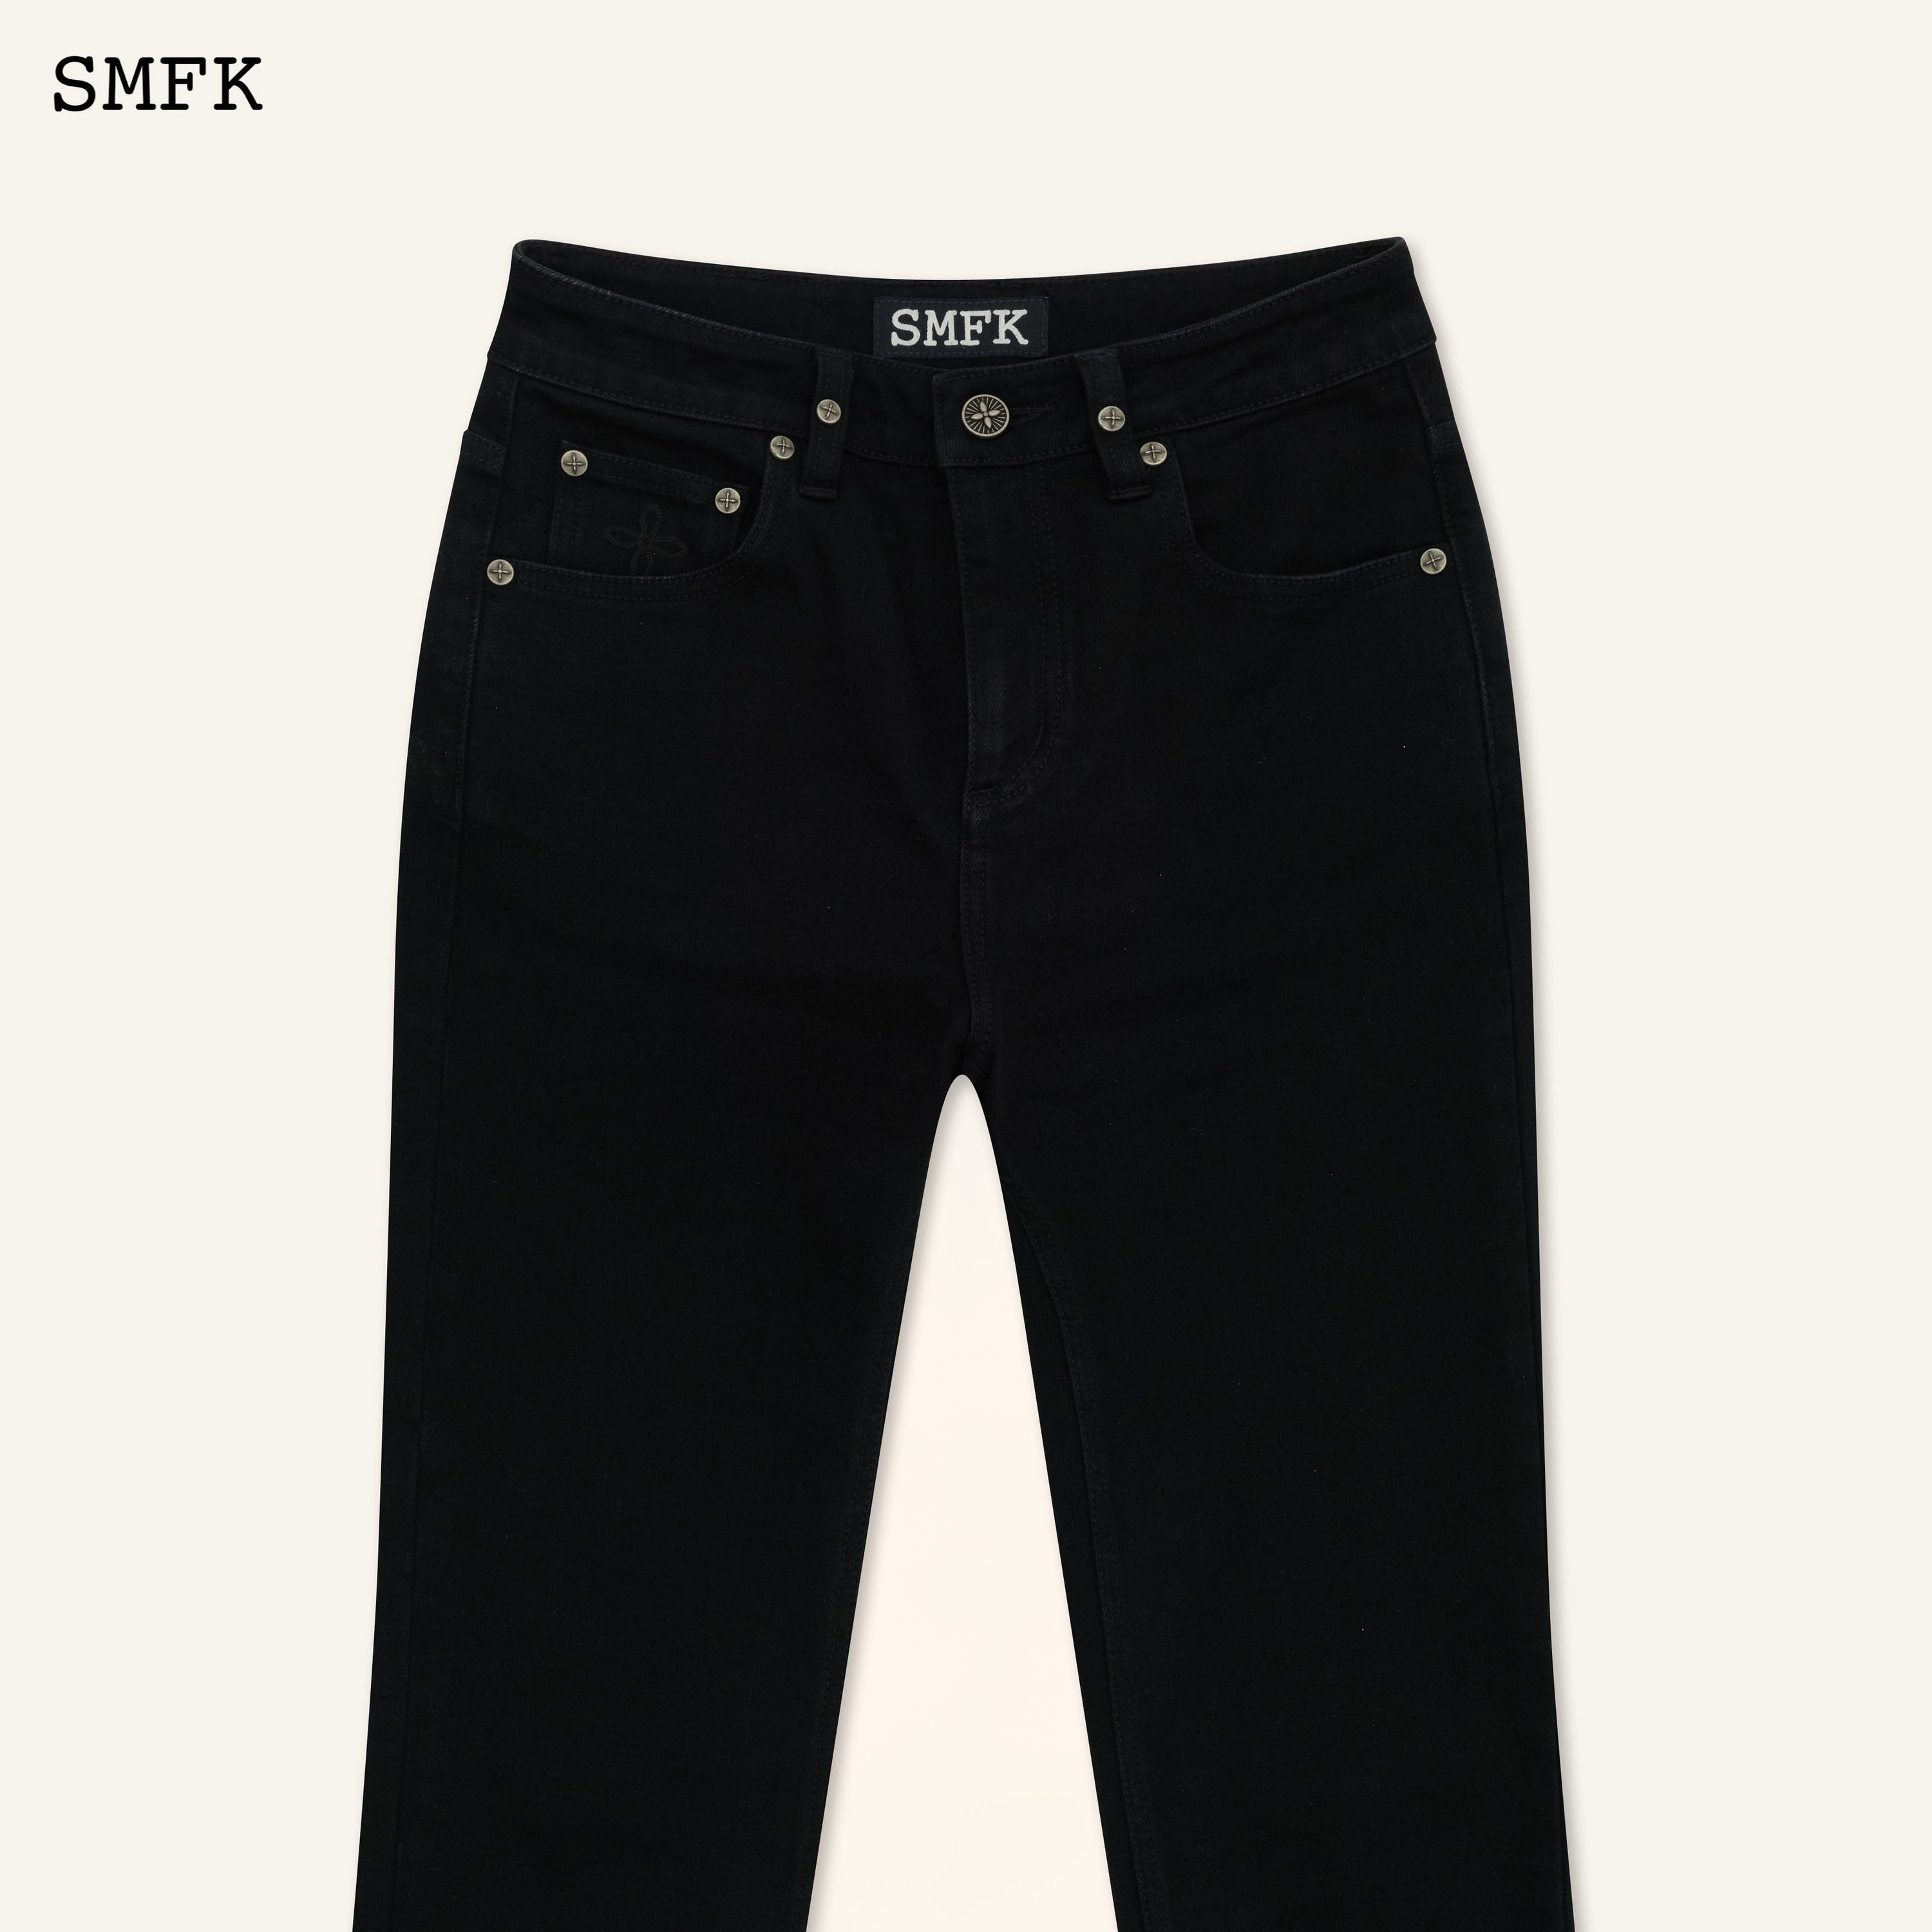 Compass Classic Horseshoe Flared Jeans Black - SMFK Official